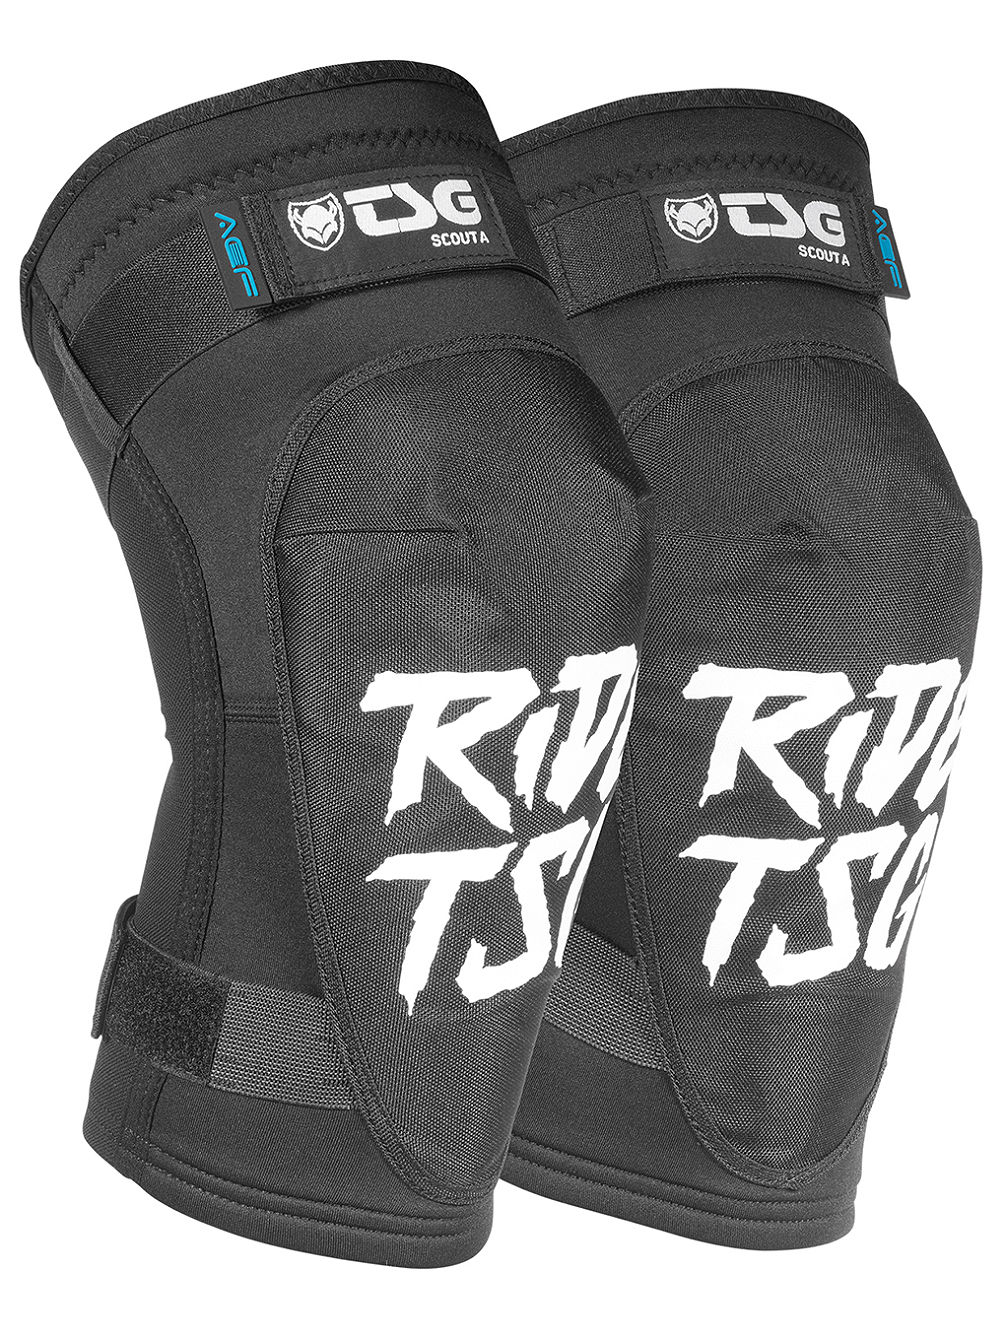 Scout A Knee Guards